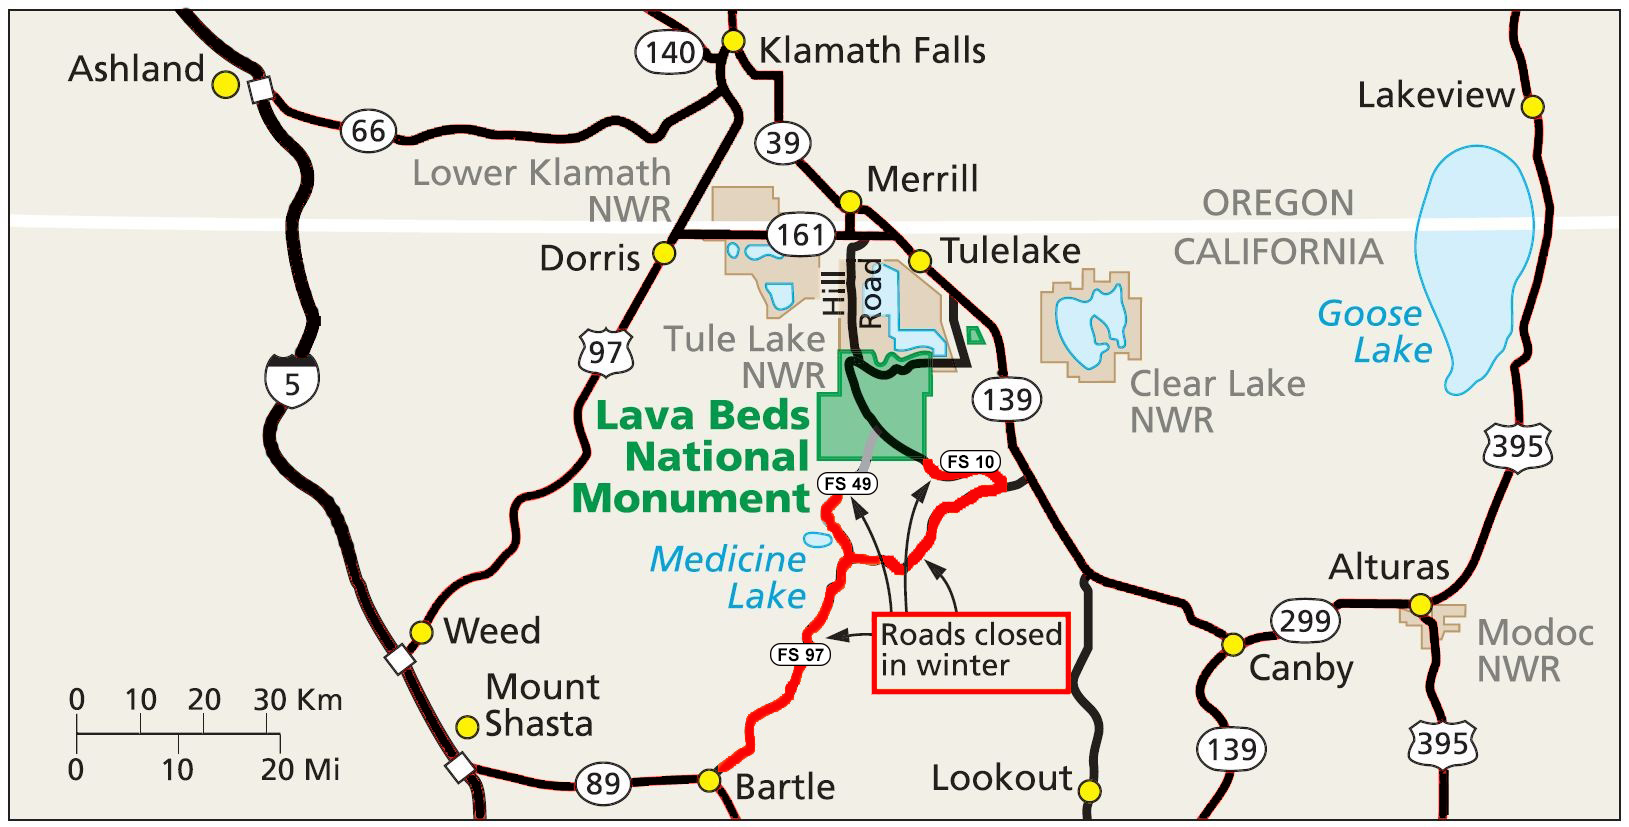 Area Map showing roads that are not maintained or that might be closed during winter weather.